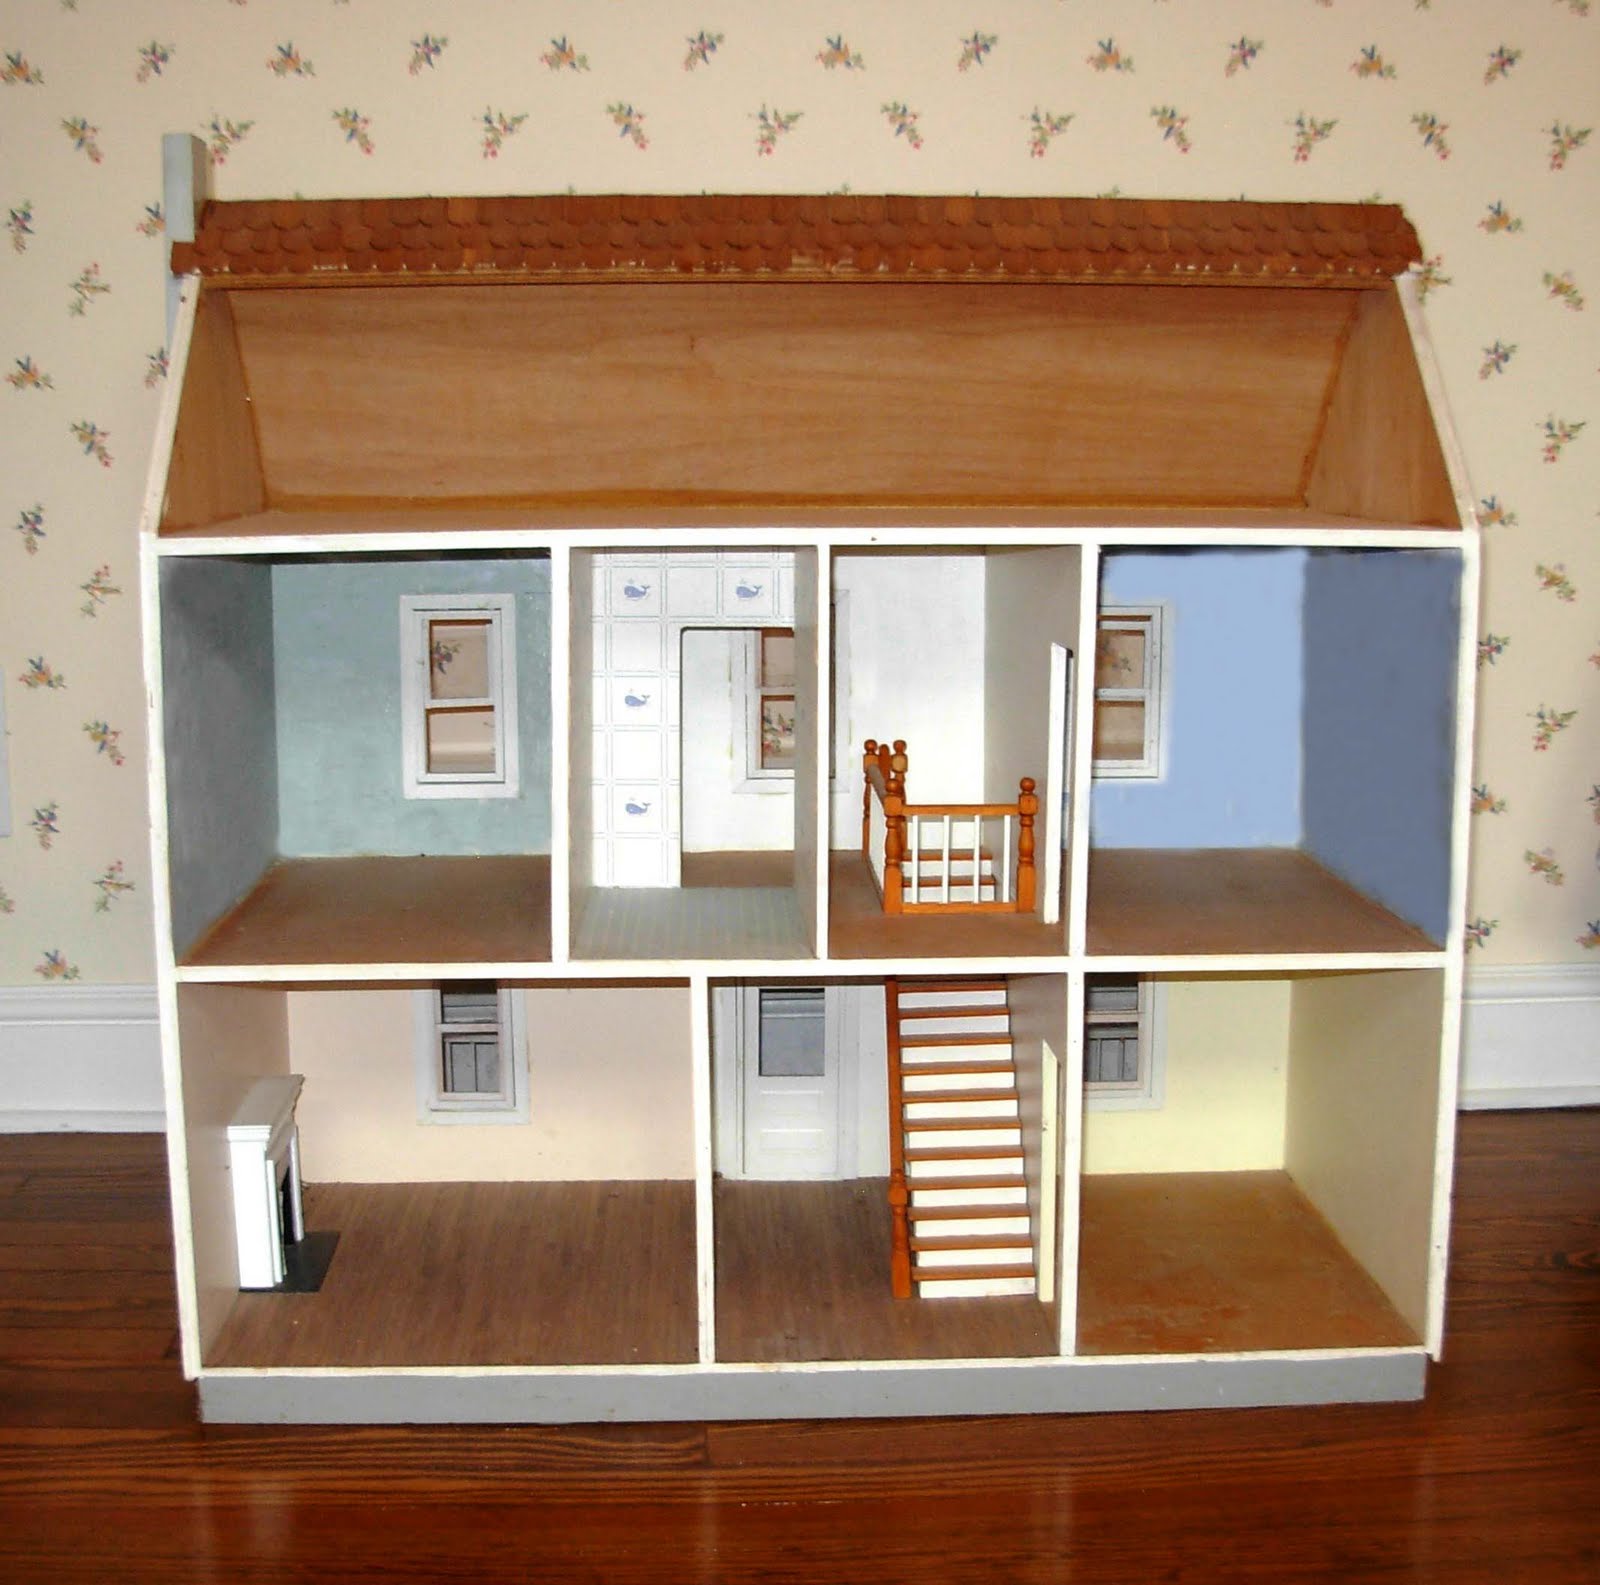 Dollhouse Drawing at Explore collection of